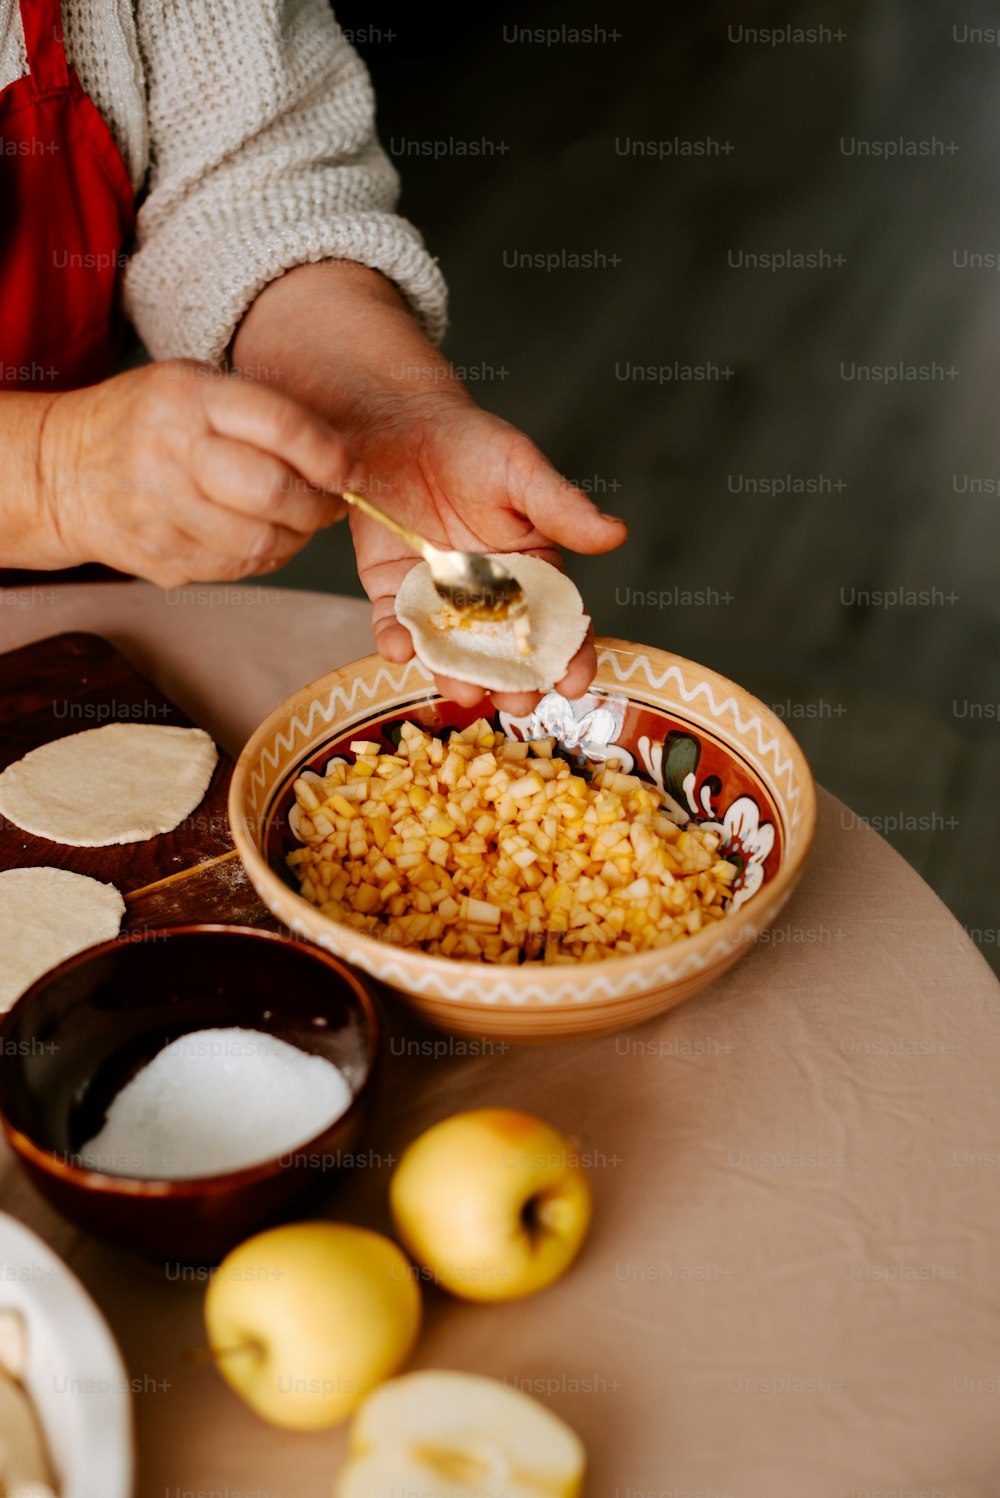 a person is putting a spoon in a bowl of food